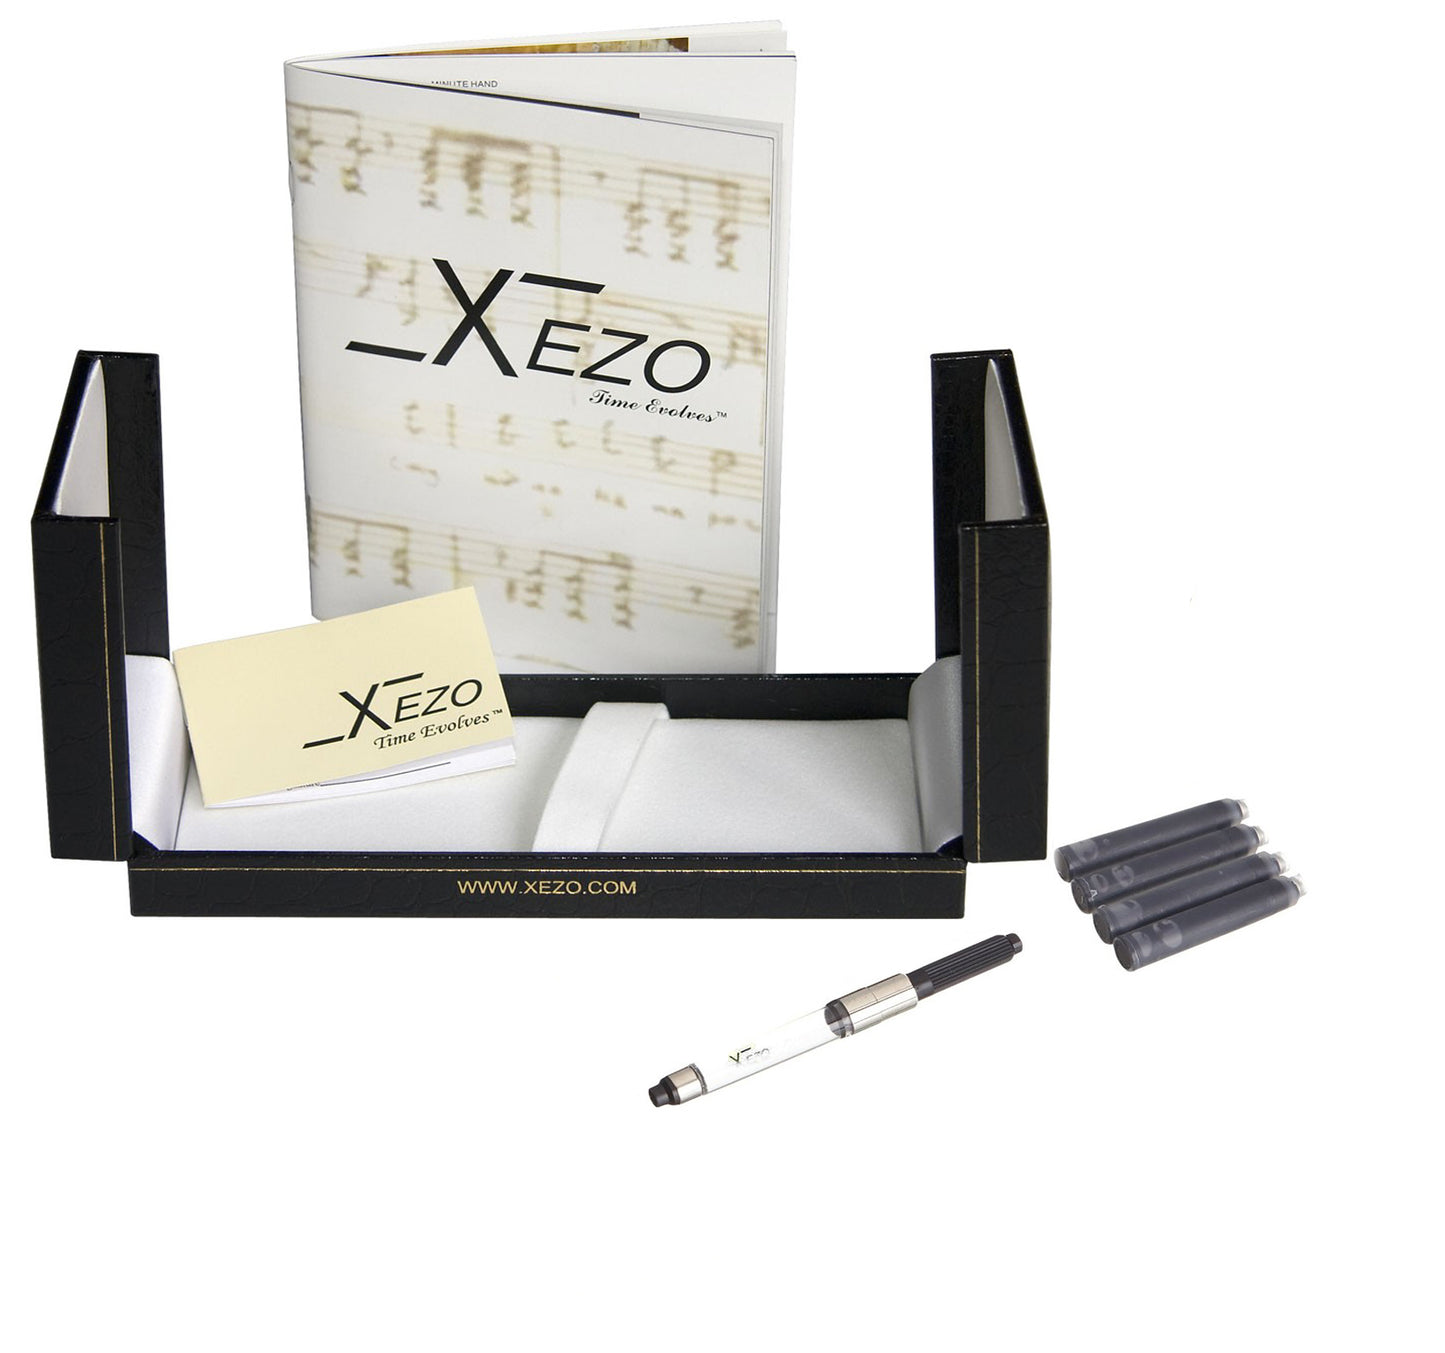 Xezo - Black gift box, certificate, manual, chrome plated ink converter, and four ink cartridges of the Incognito 925 Sterling Silver F-2 fountain pen